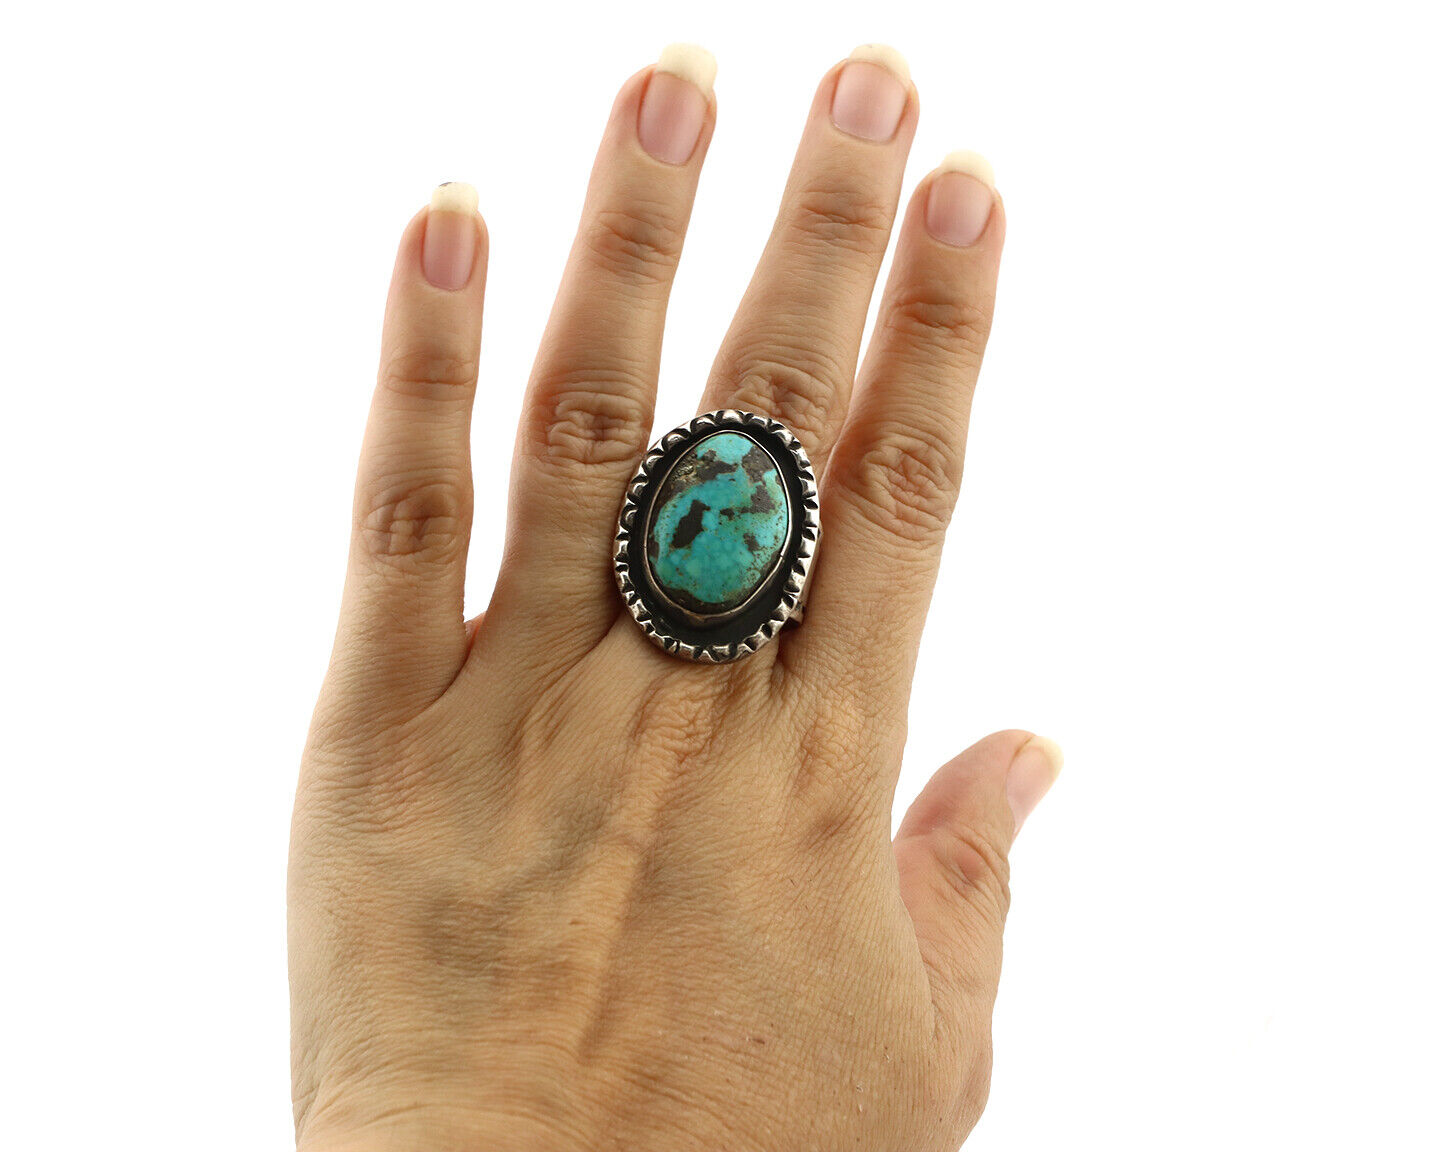 Navajo Ring 925 Silver Bisbee Turquoise Native American Artist C.1980's